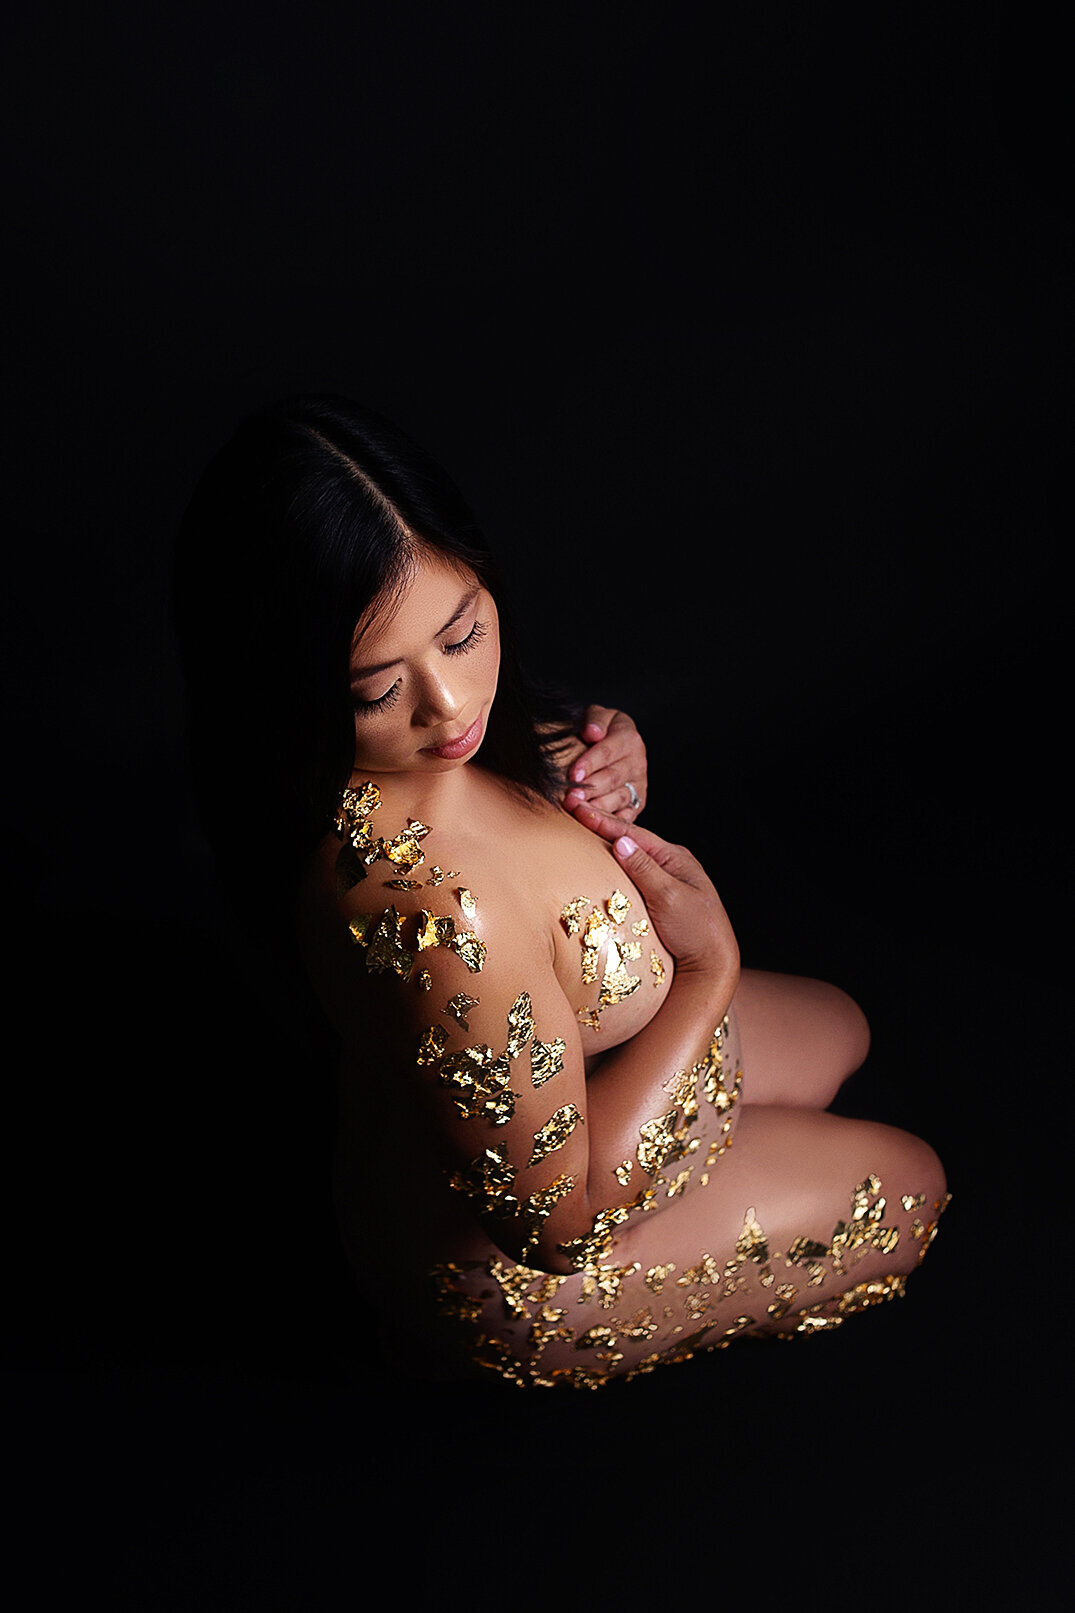 Women posing nude with gold foil on pregnant belly during maternity photoshoot in Mount Juliet tennessee photography studio